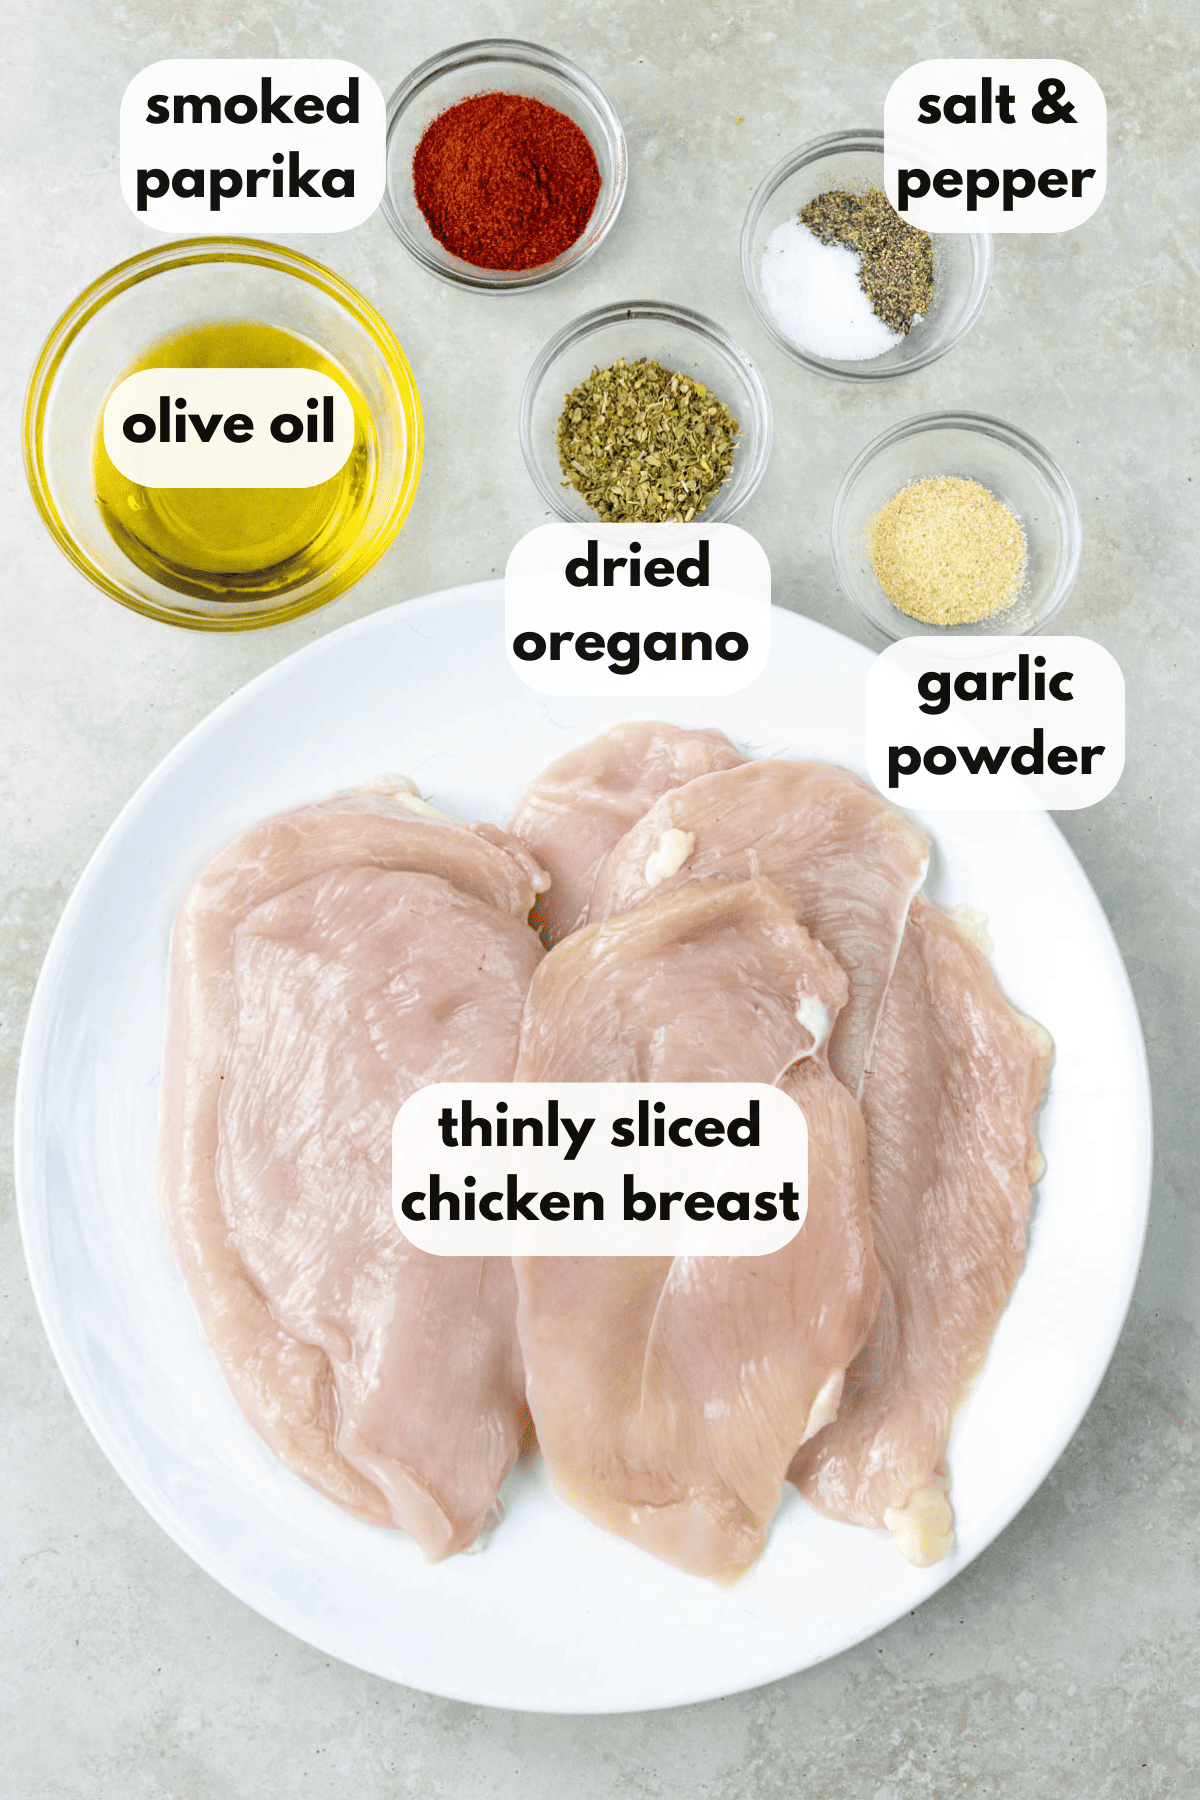 Ingredients for baked thin chicken